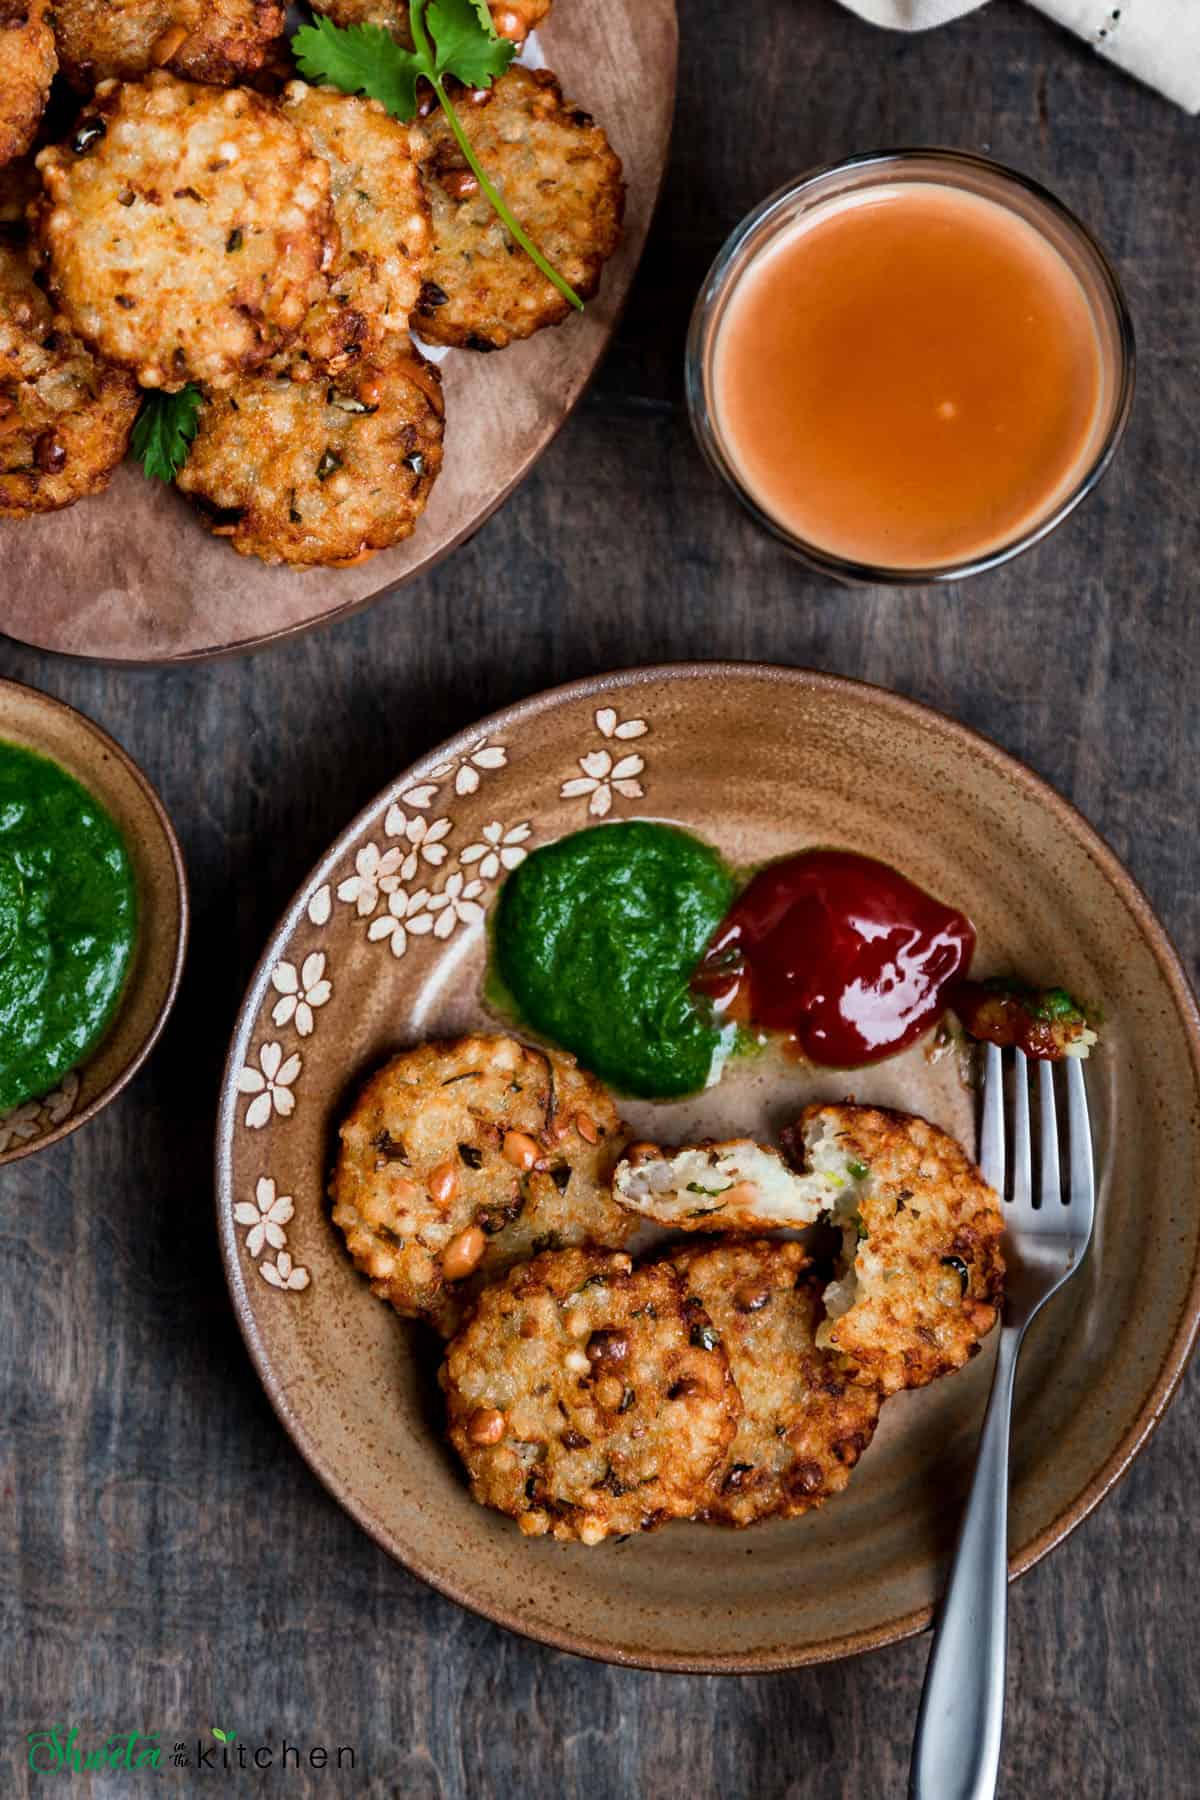 Four sabudana vada served on a plate with a spoonful of green chutney and ketchup